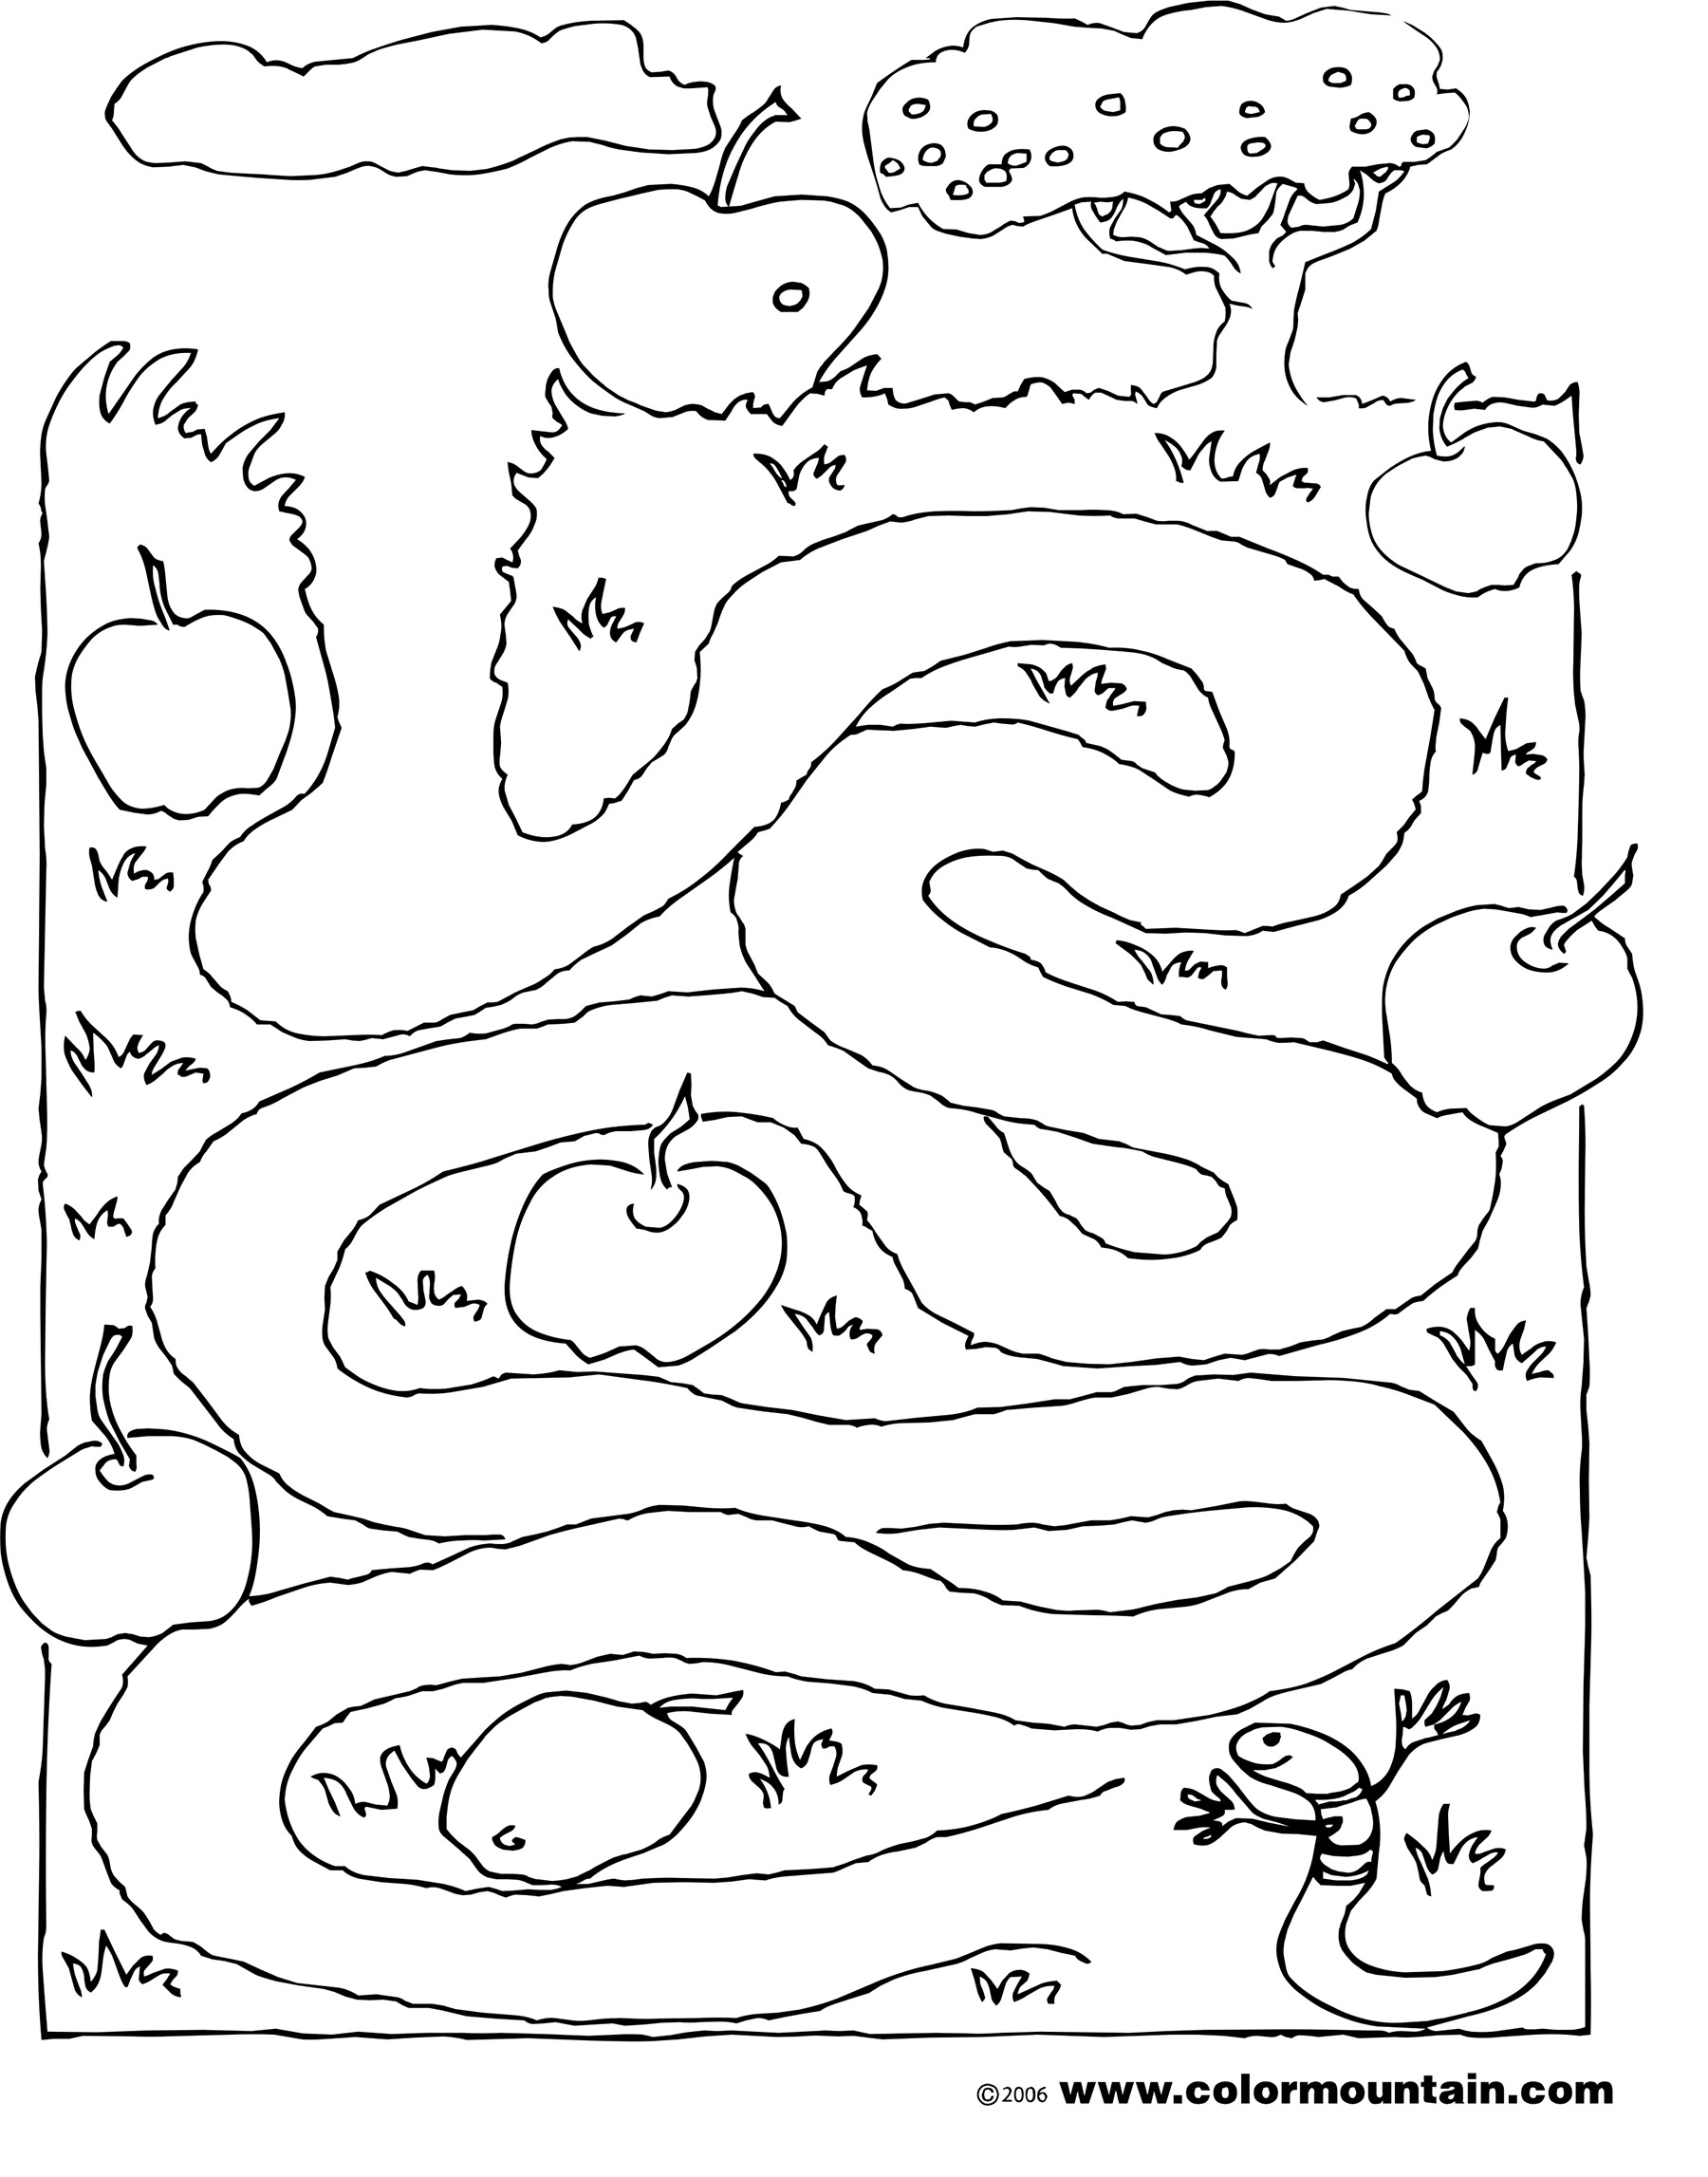 New Coloring Pages : Maze Worm Page Food Guide Create ...